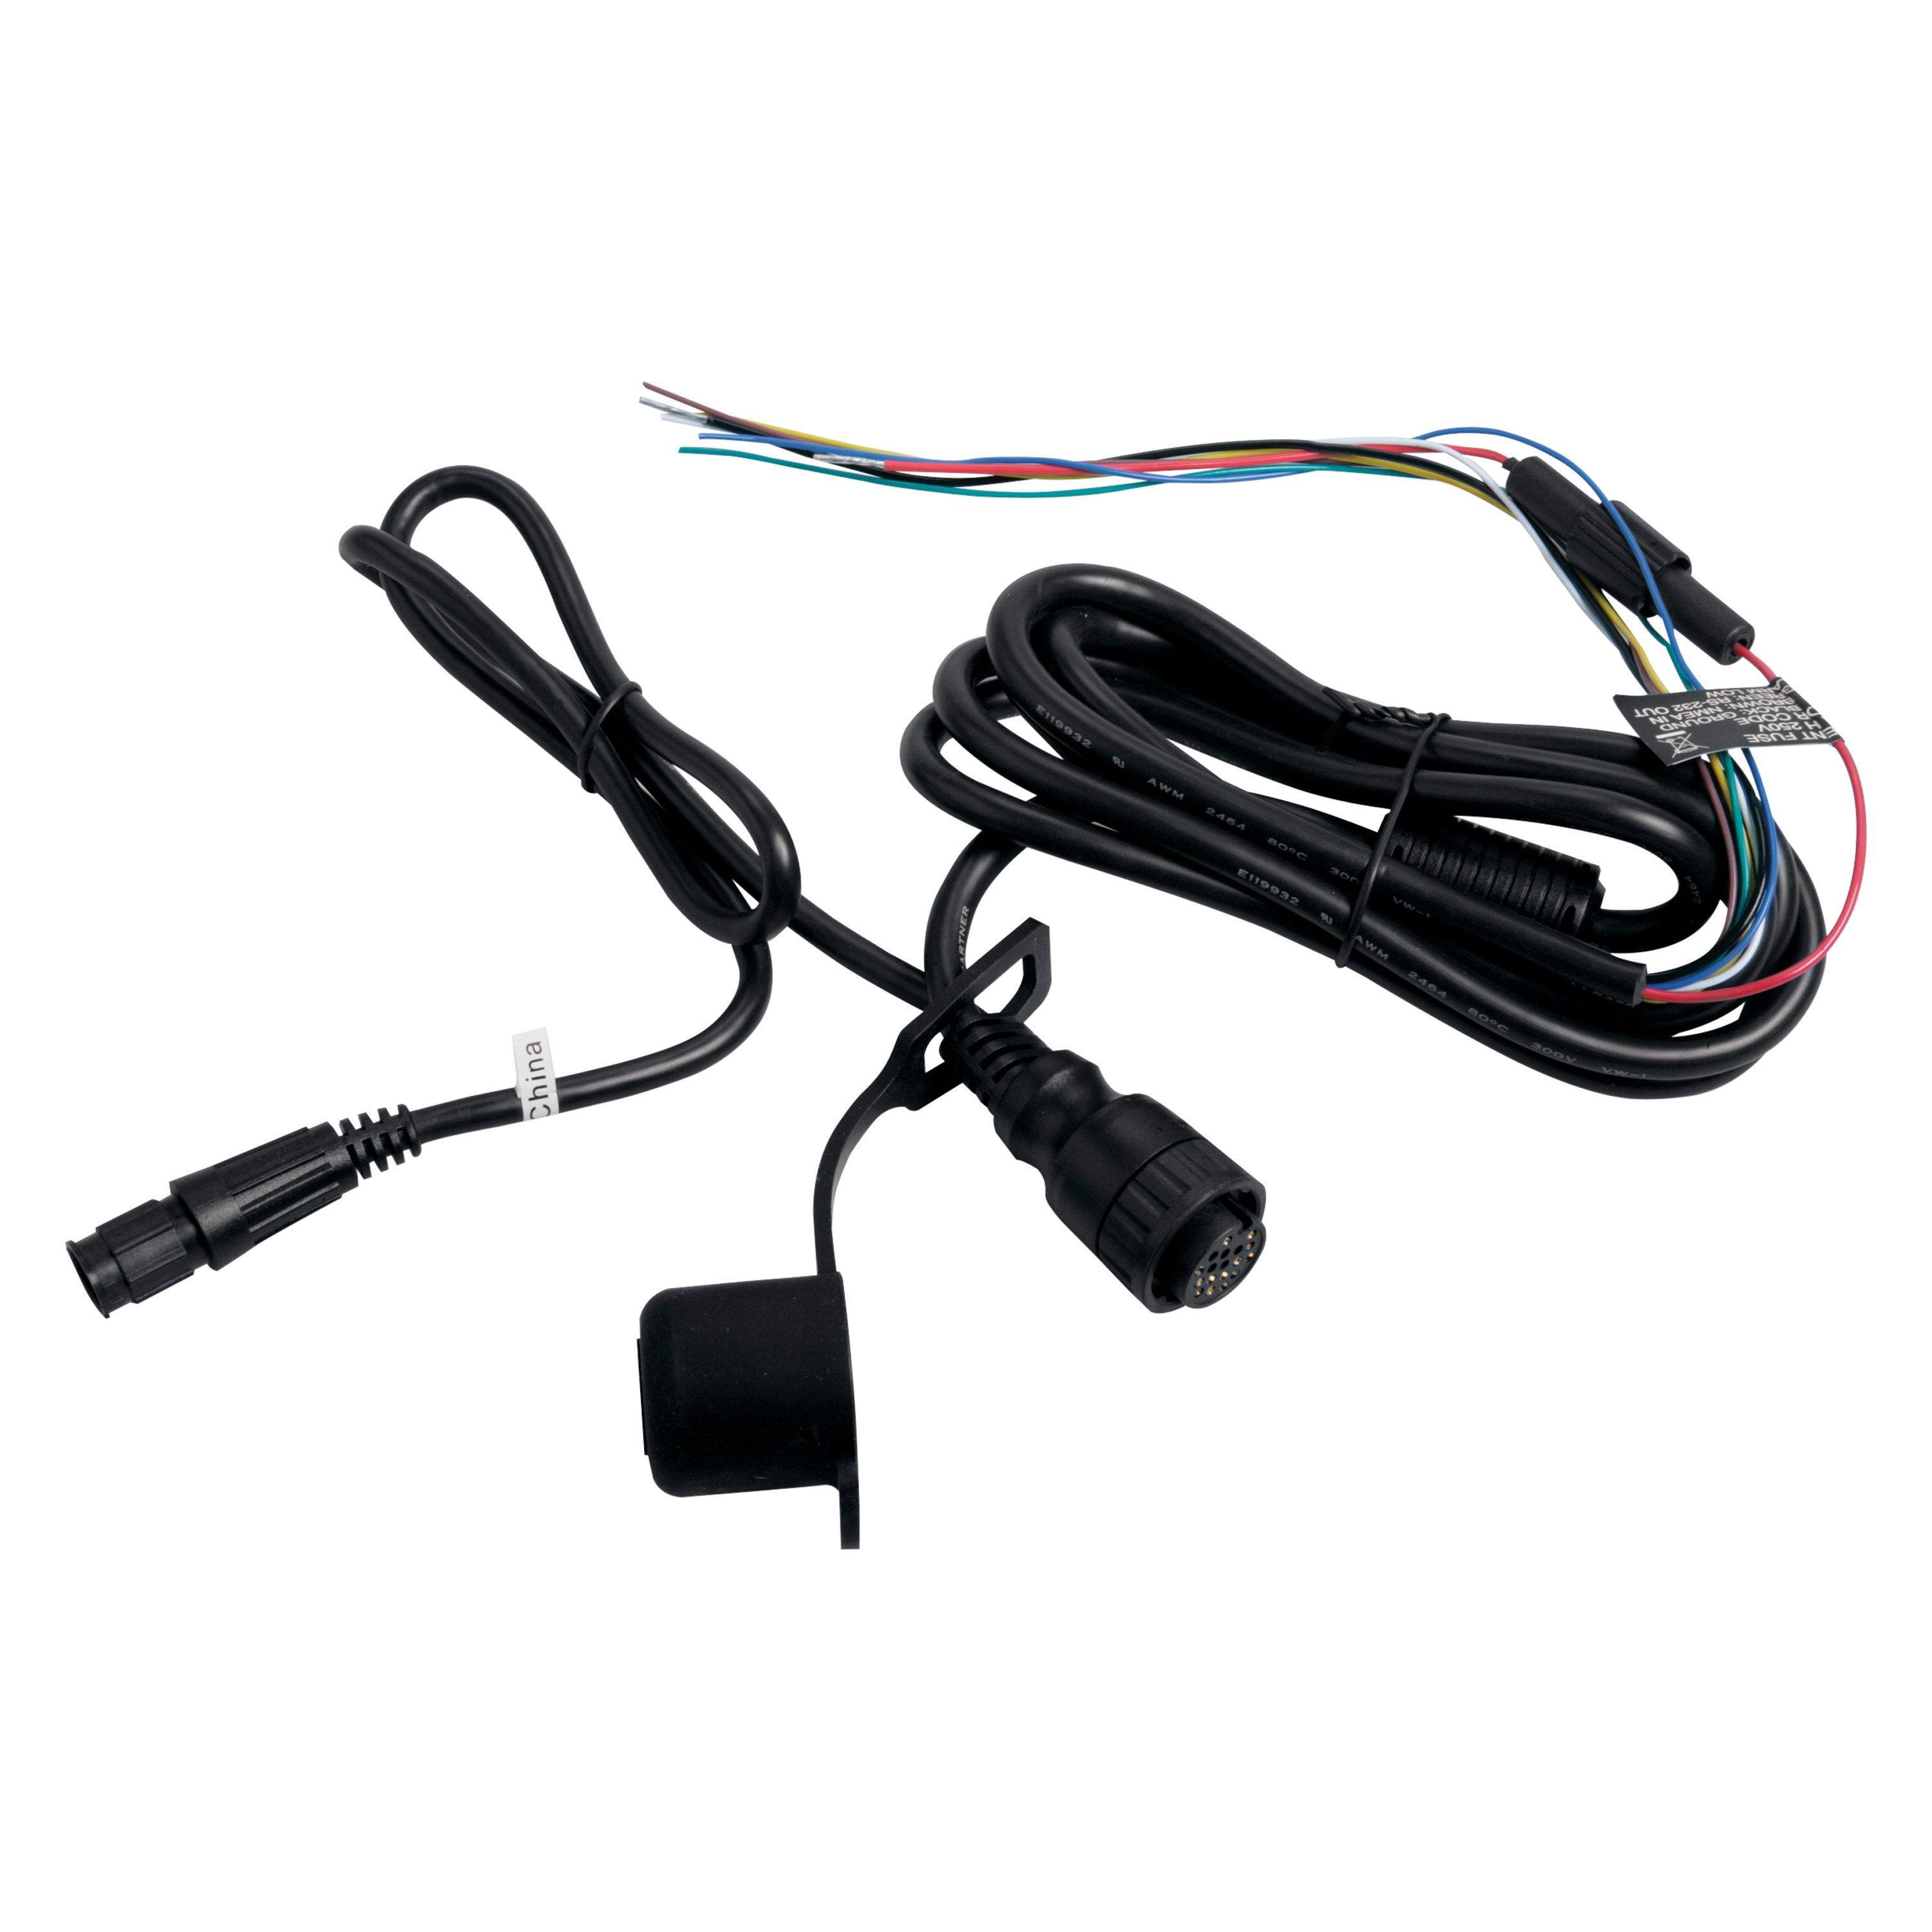 Garmin® Power/Data Cable with NMEA/Bare Wires for Fishfinder 90/140/160 - BOATiD.com